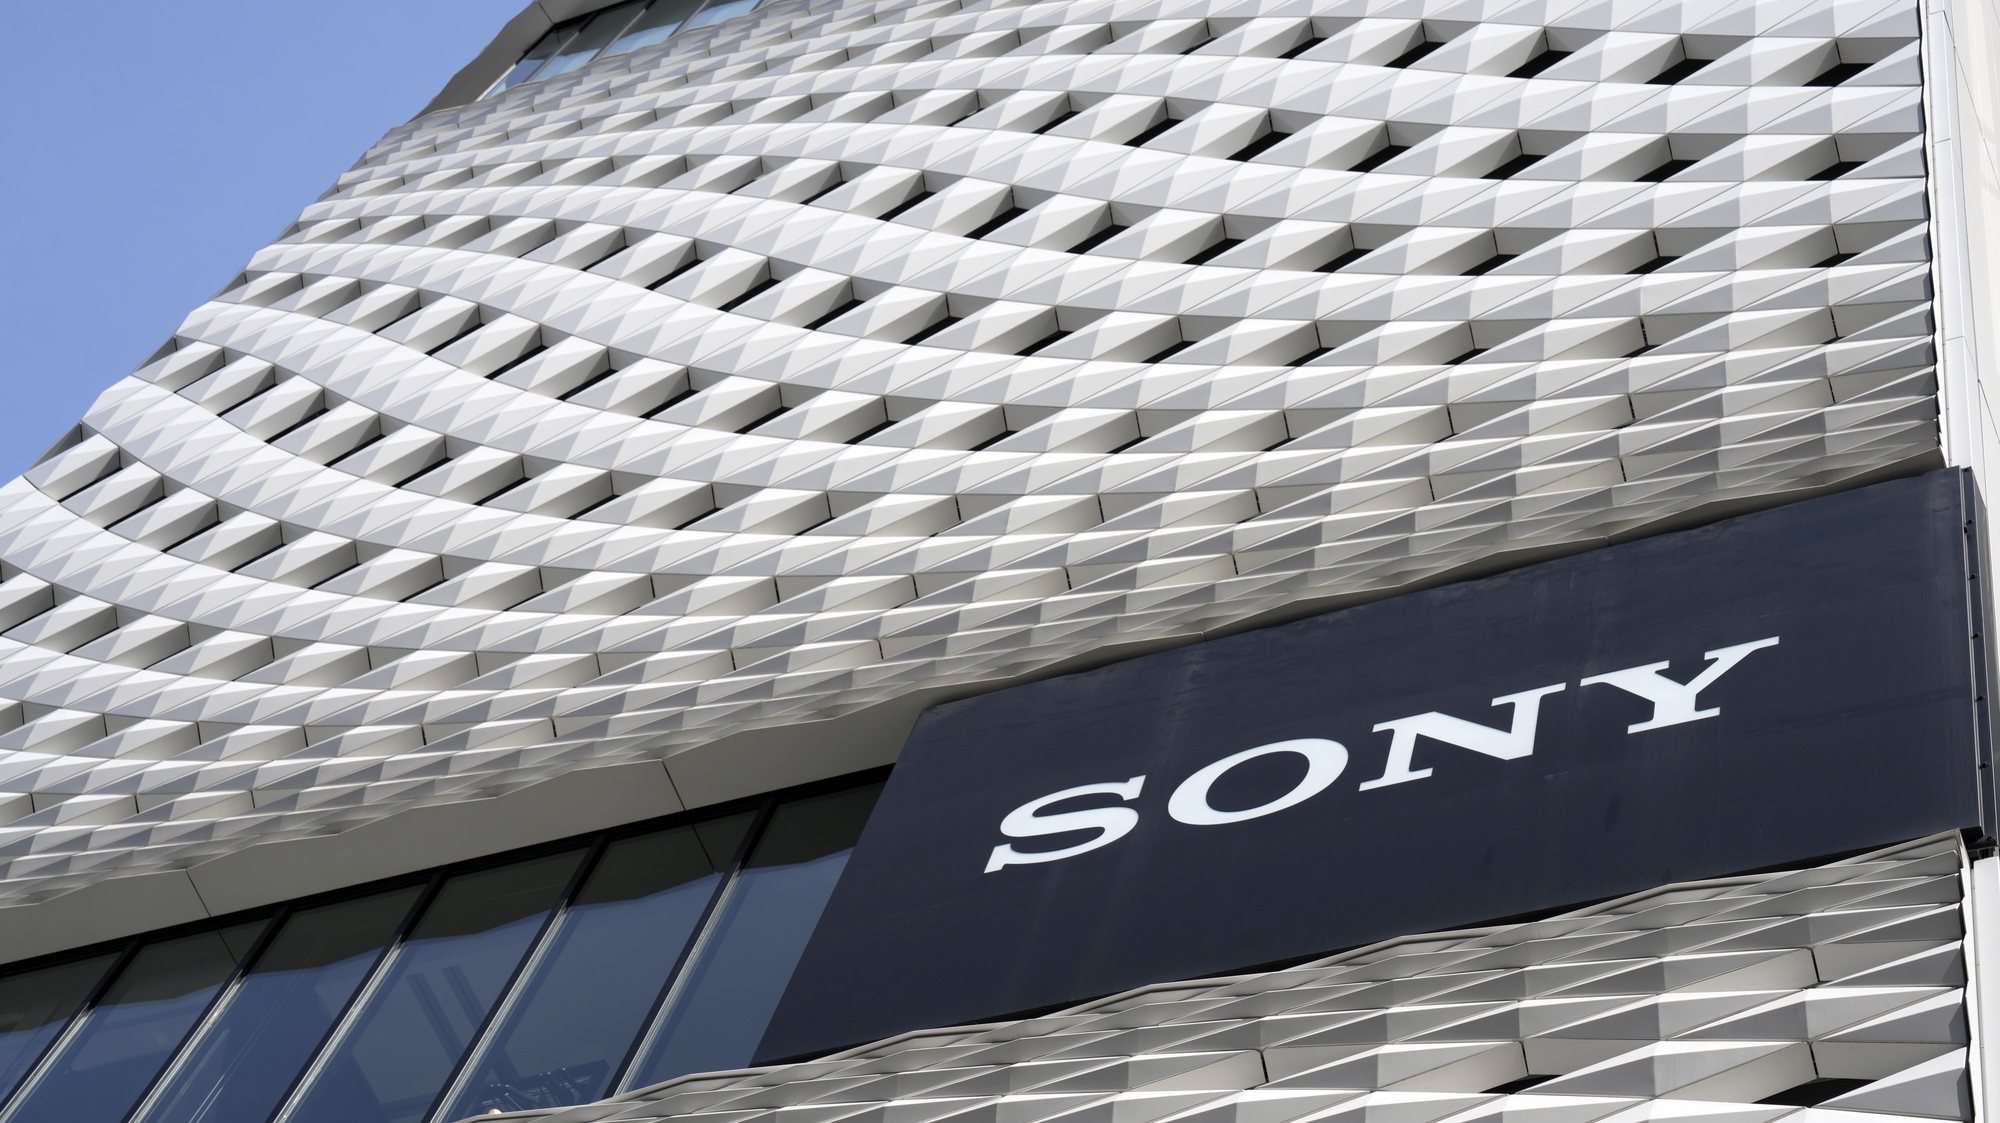 epa10595944 The Sony logo on a building in Tokyo, Japan, 28 April 2023. Sony Group Corp. announced its full year results for the fiscal year starting April 2022 and ending March 2023, showing its group sales increase by 16 percent from a year earlier to reach 11.5 trillion yen (76 billion euros).  EPA/FRANCK ROBICHON